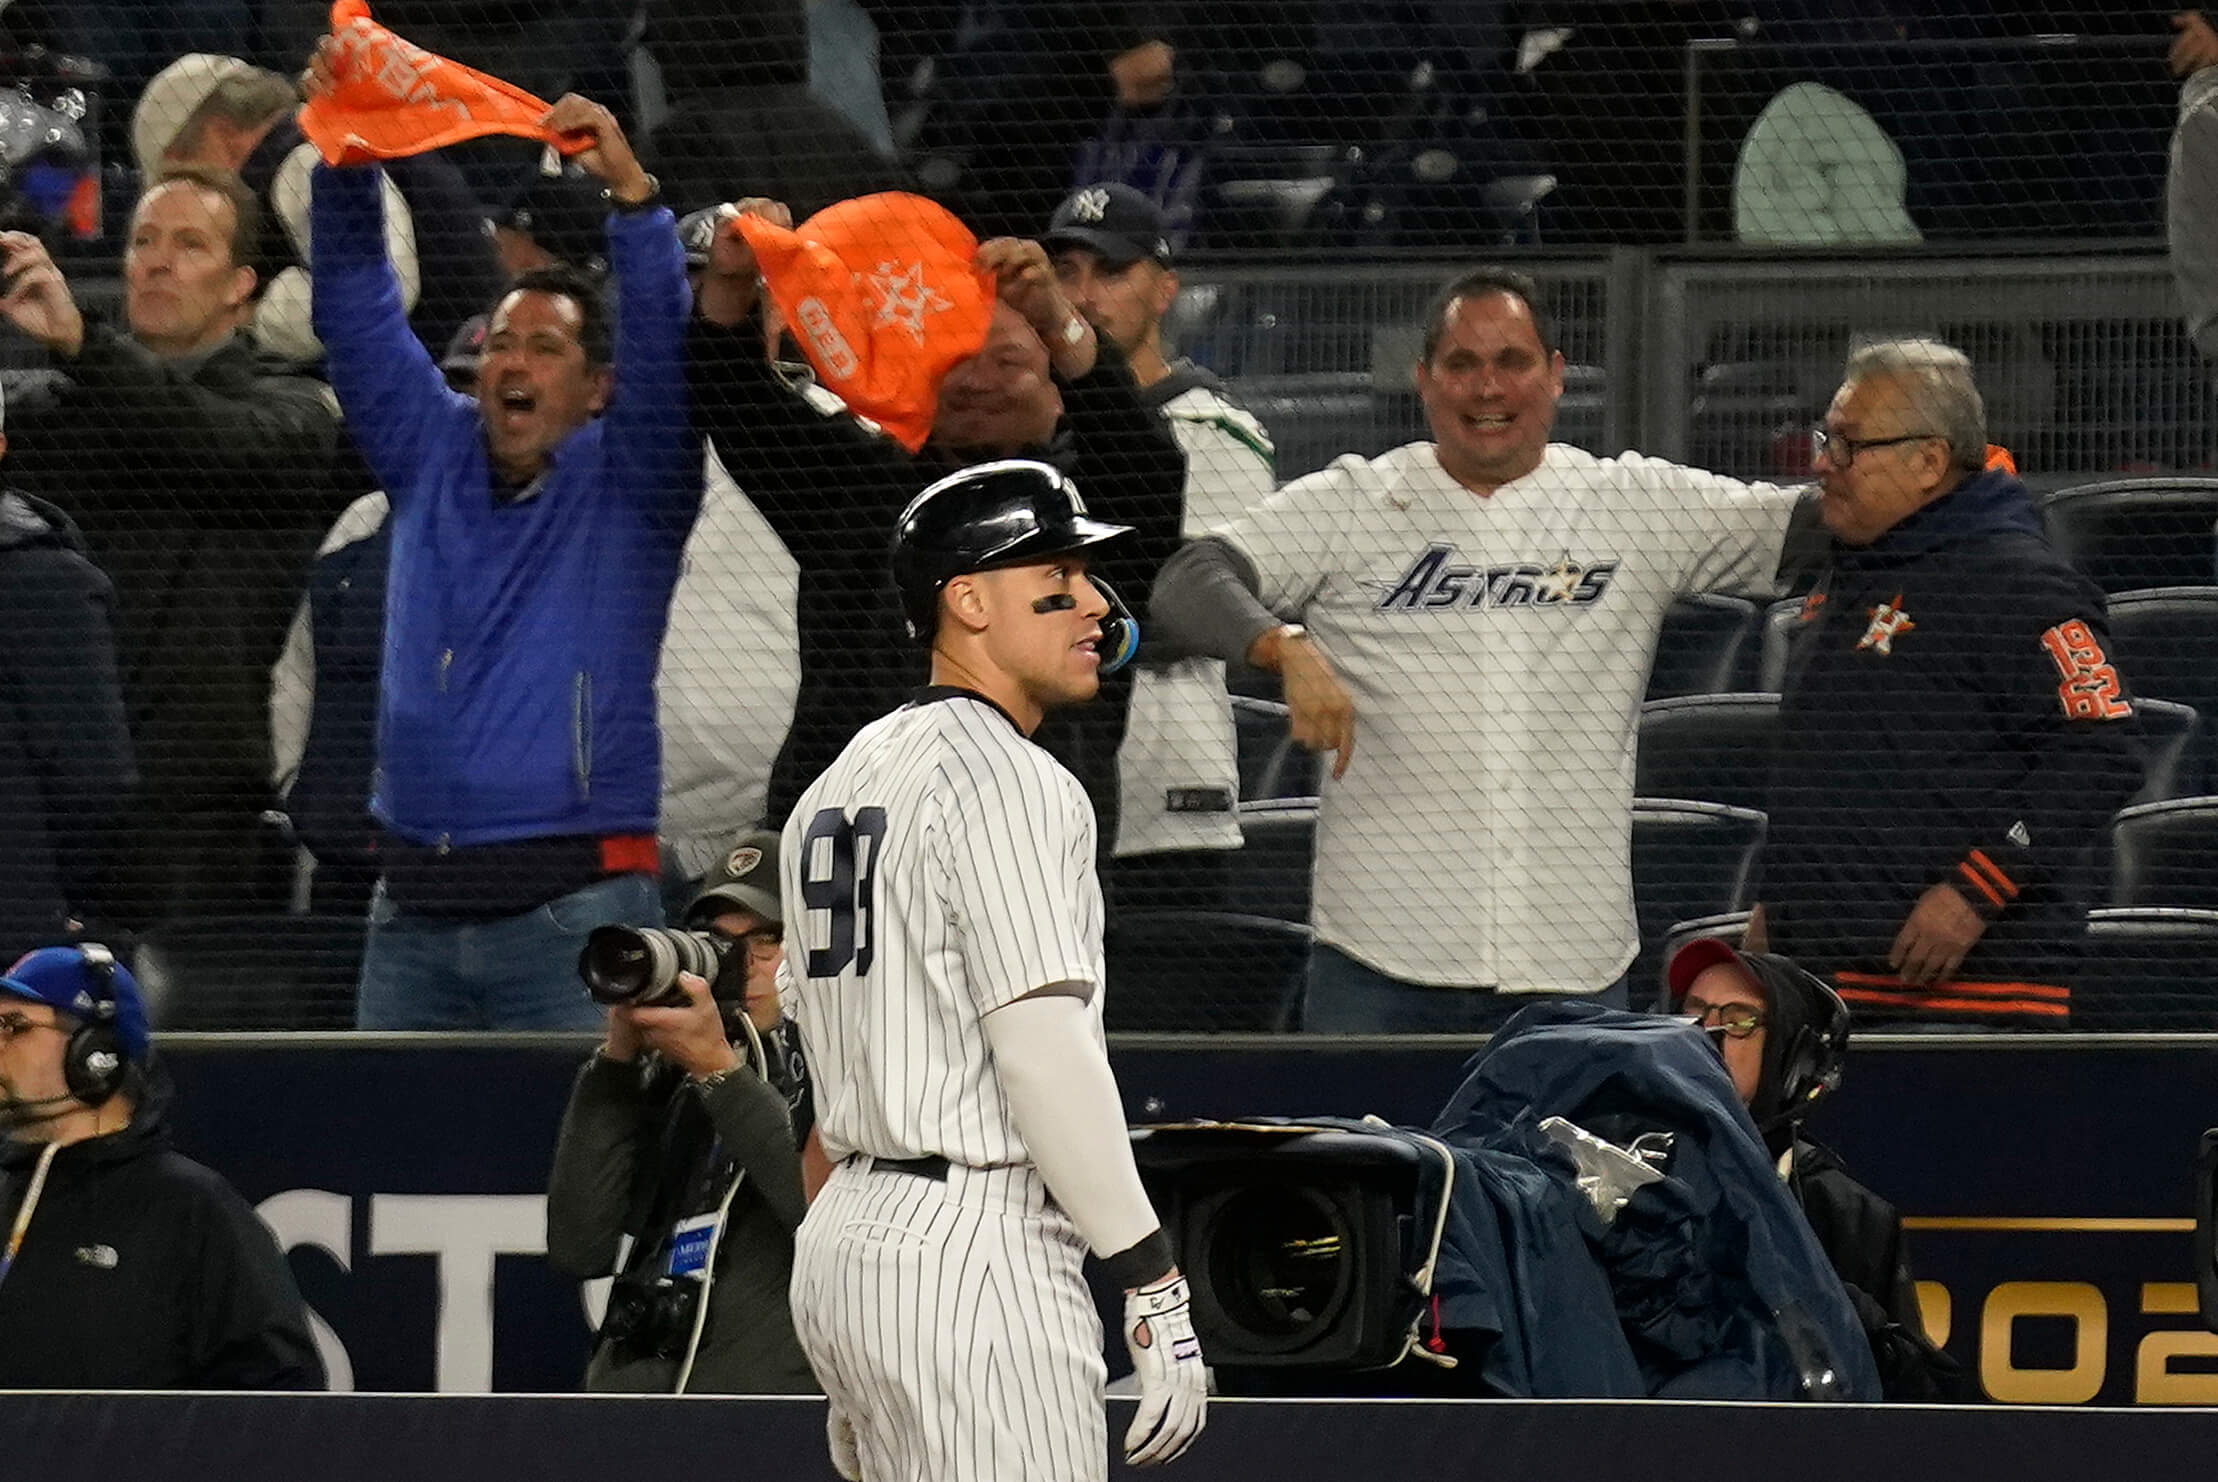 Yankees fans, including some Staten Islanders, were left out in